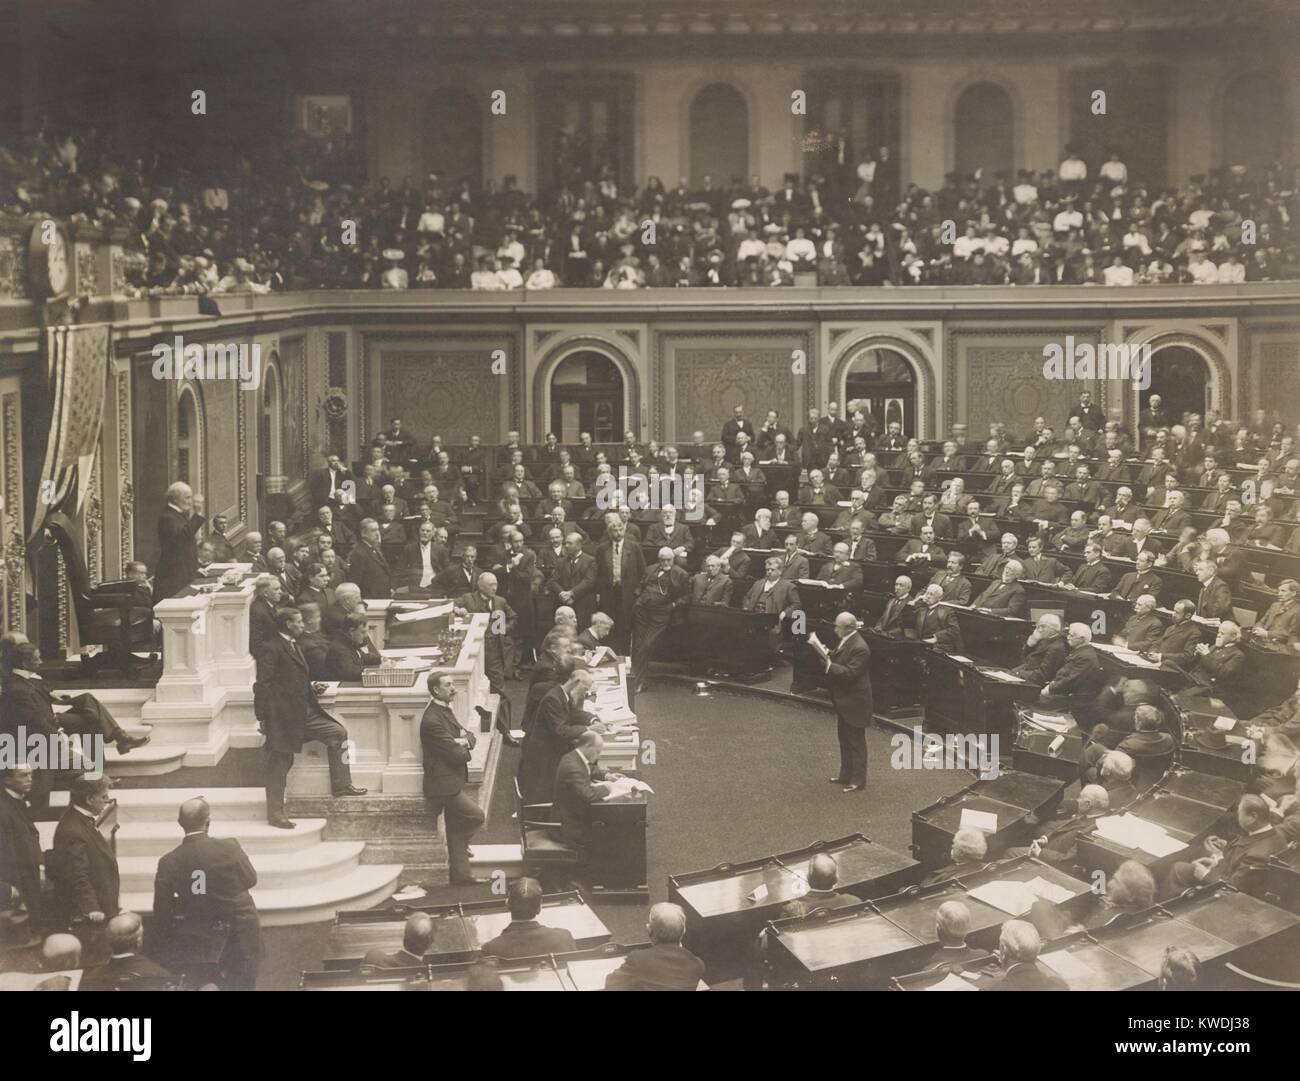 US House of Representatives in session in 1906. Joseph Cannon stands at the Speakers Rostrum. Photo by Frances Benjamin Johnston (BSLOC 2017 8 89) Stock Photo